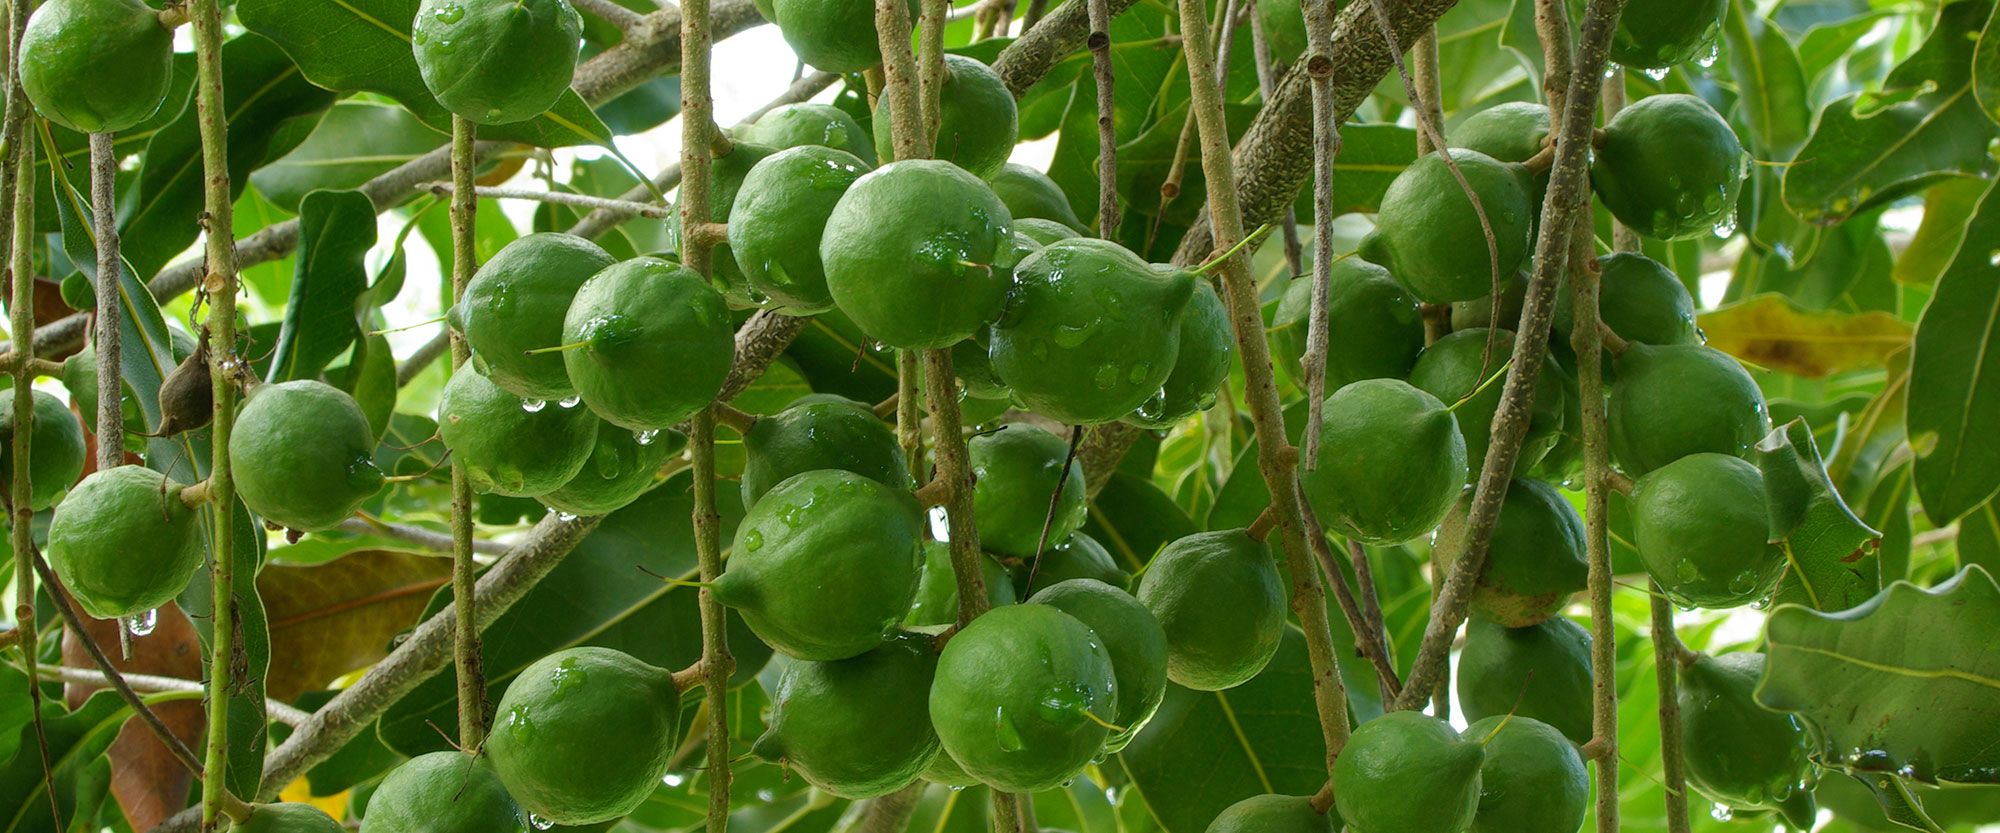 Macademia nuts growing on a tree